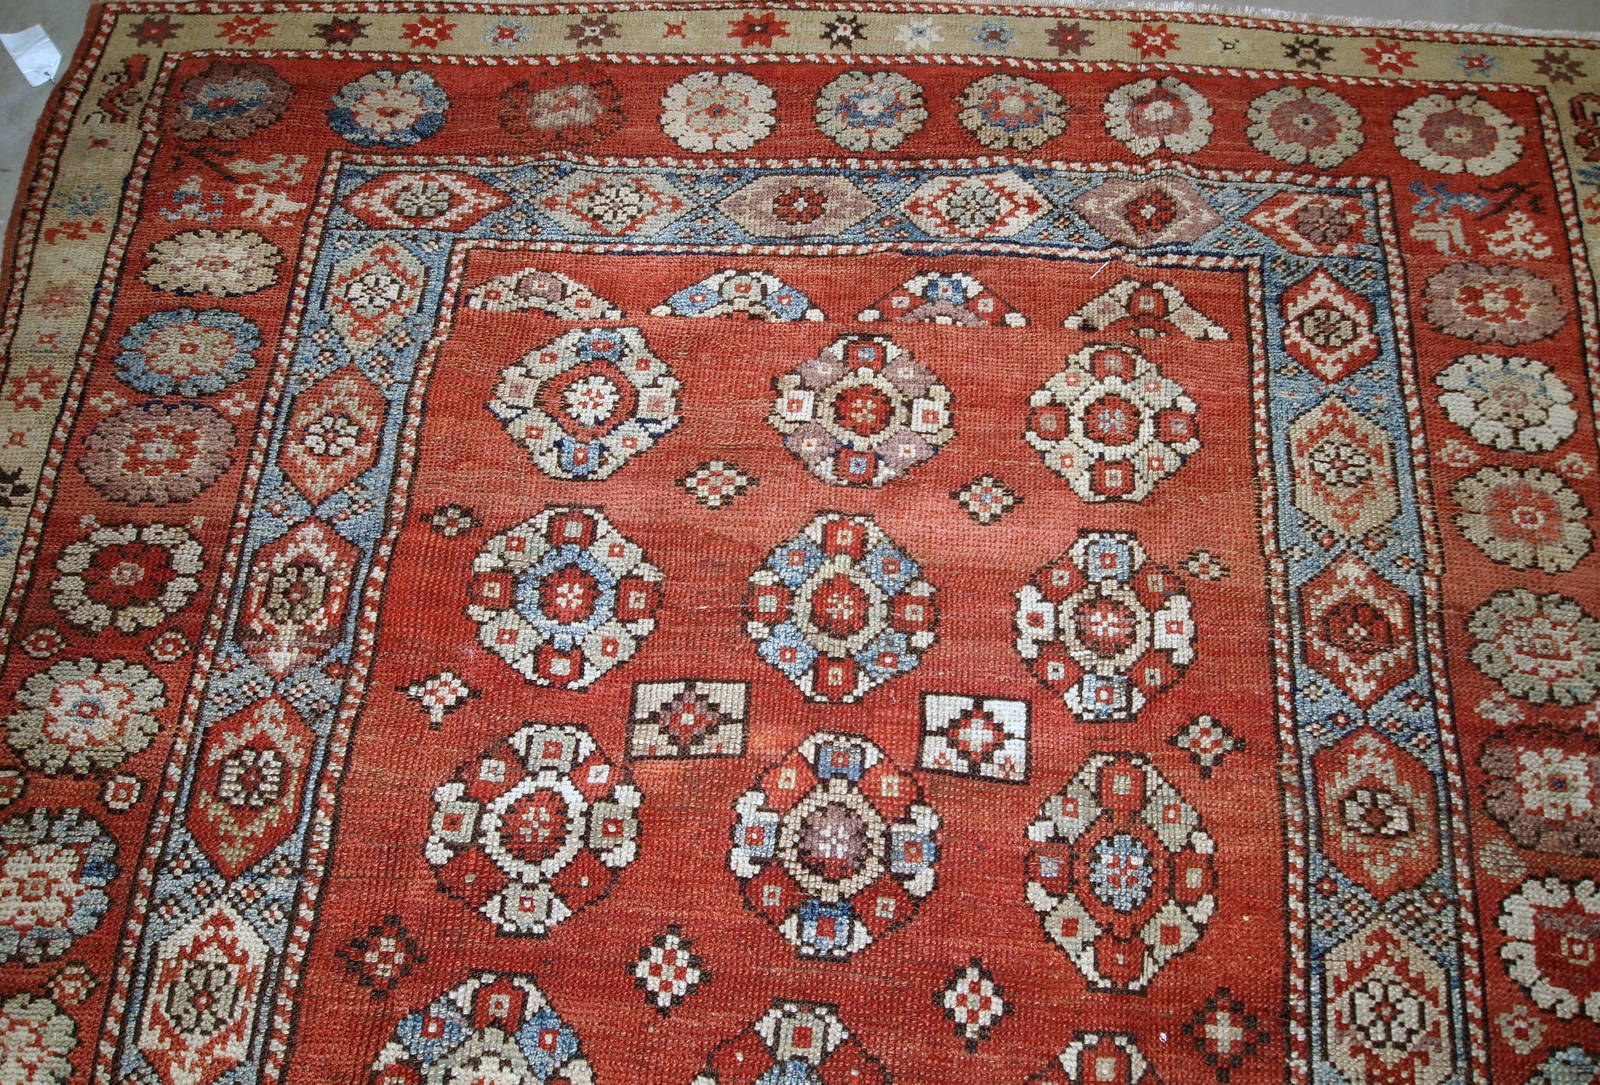 Handmade antique Turkish Melas rug in red, sky blue and beige shades. The rug is from the end of 19th century in original good condition.